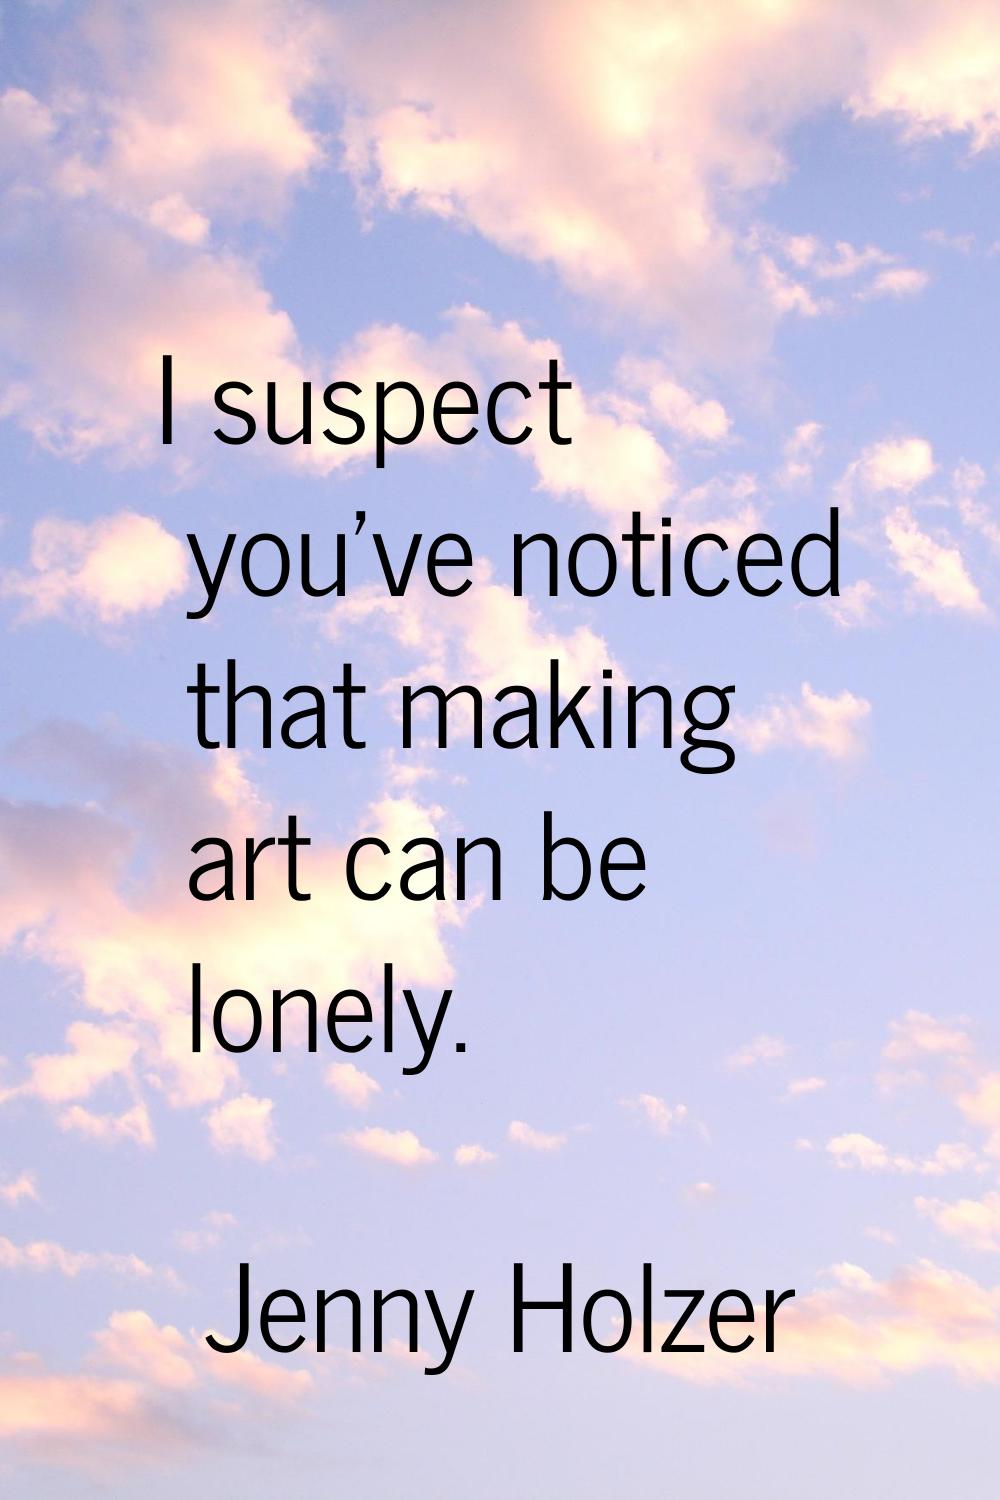 I suspect you've noticed that making art can be lonely.